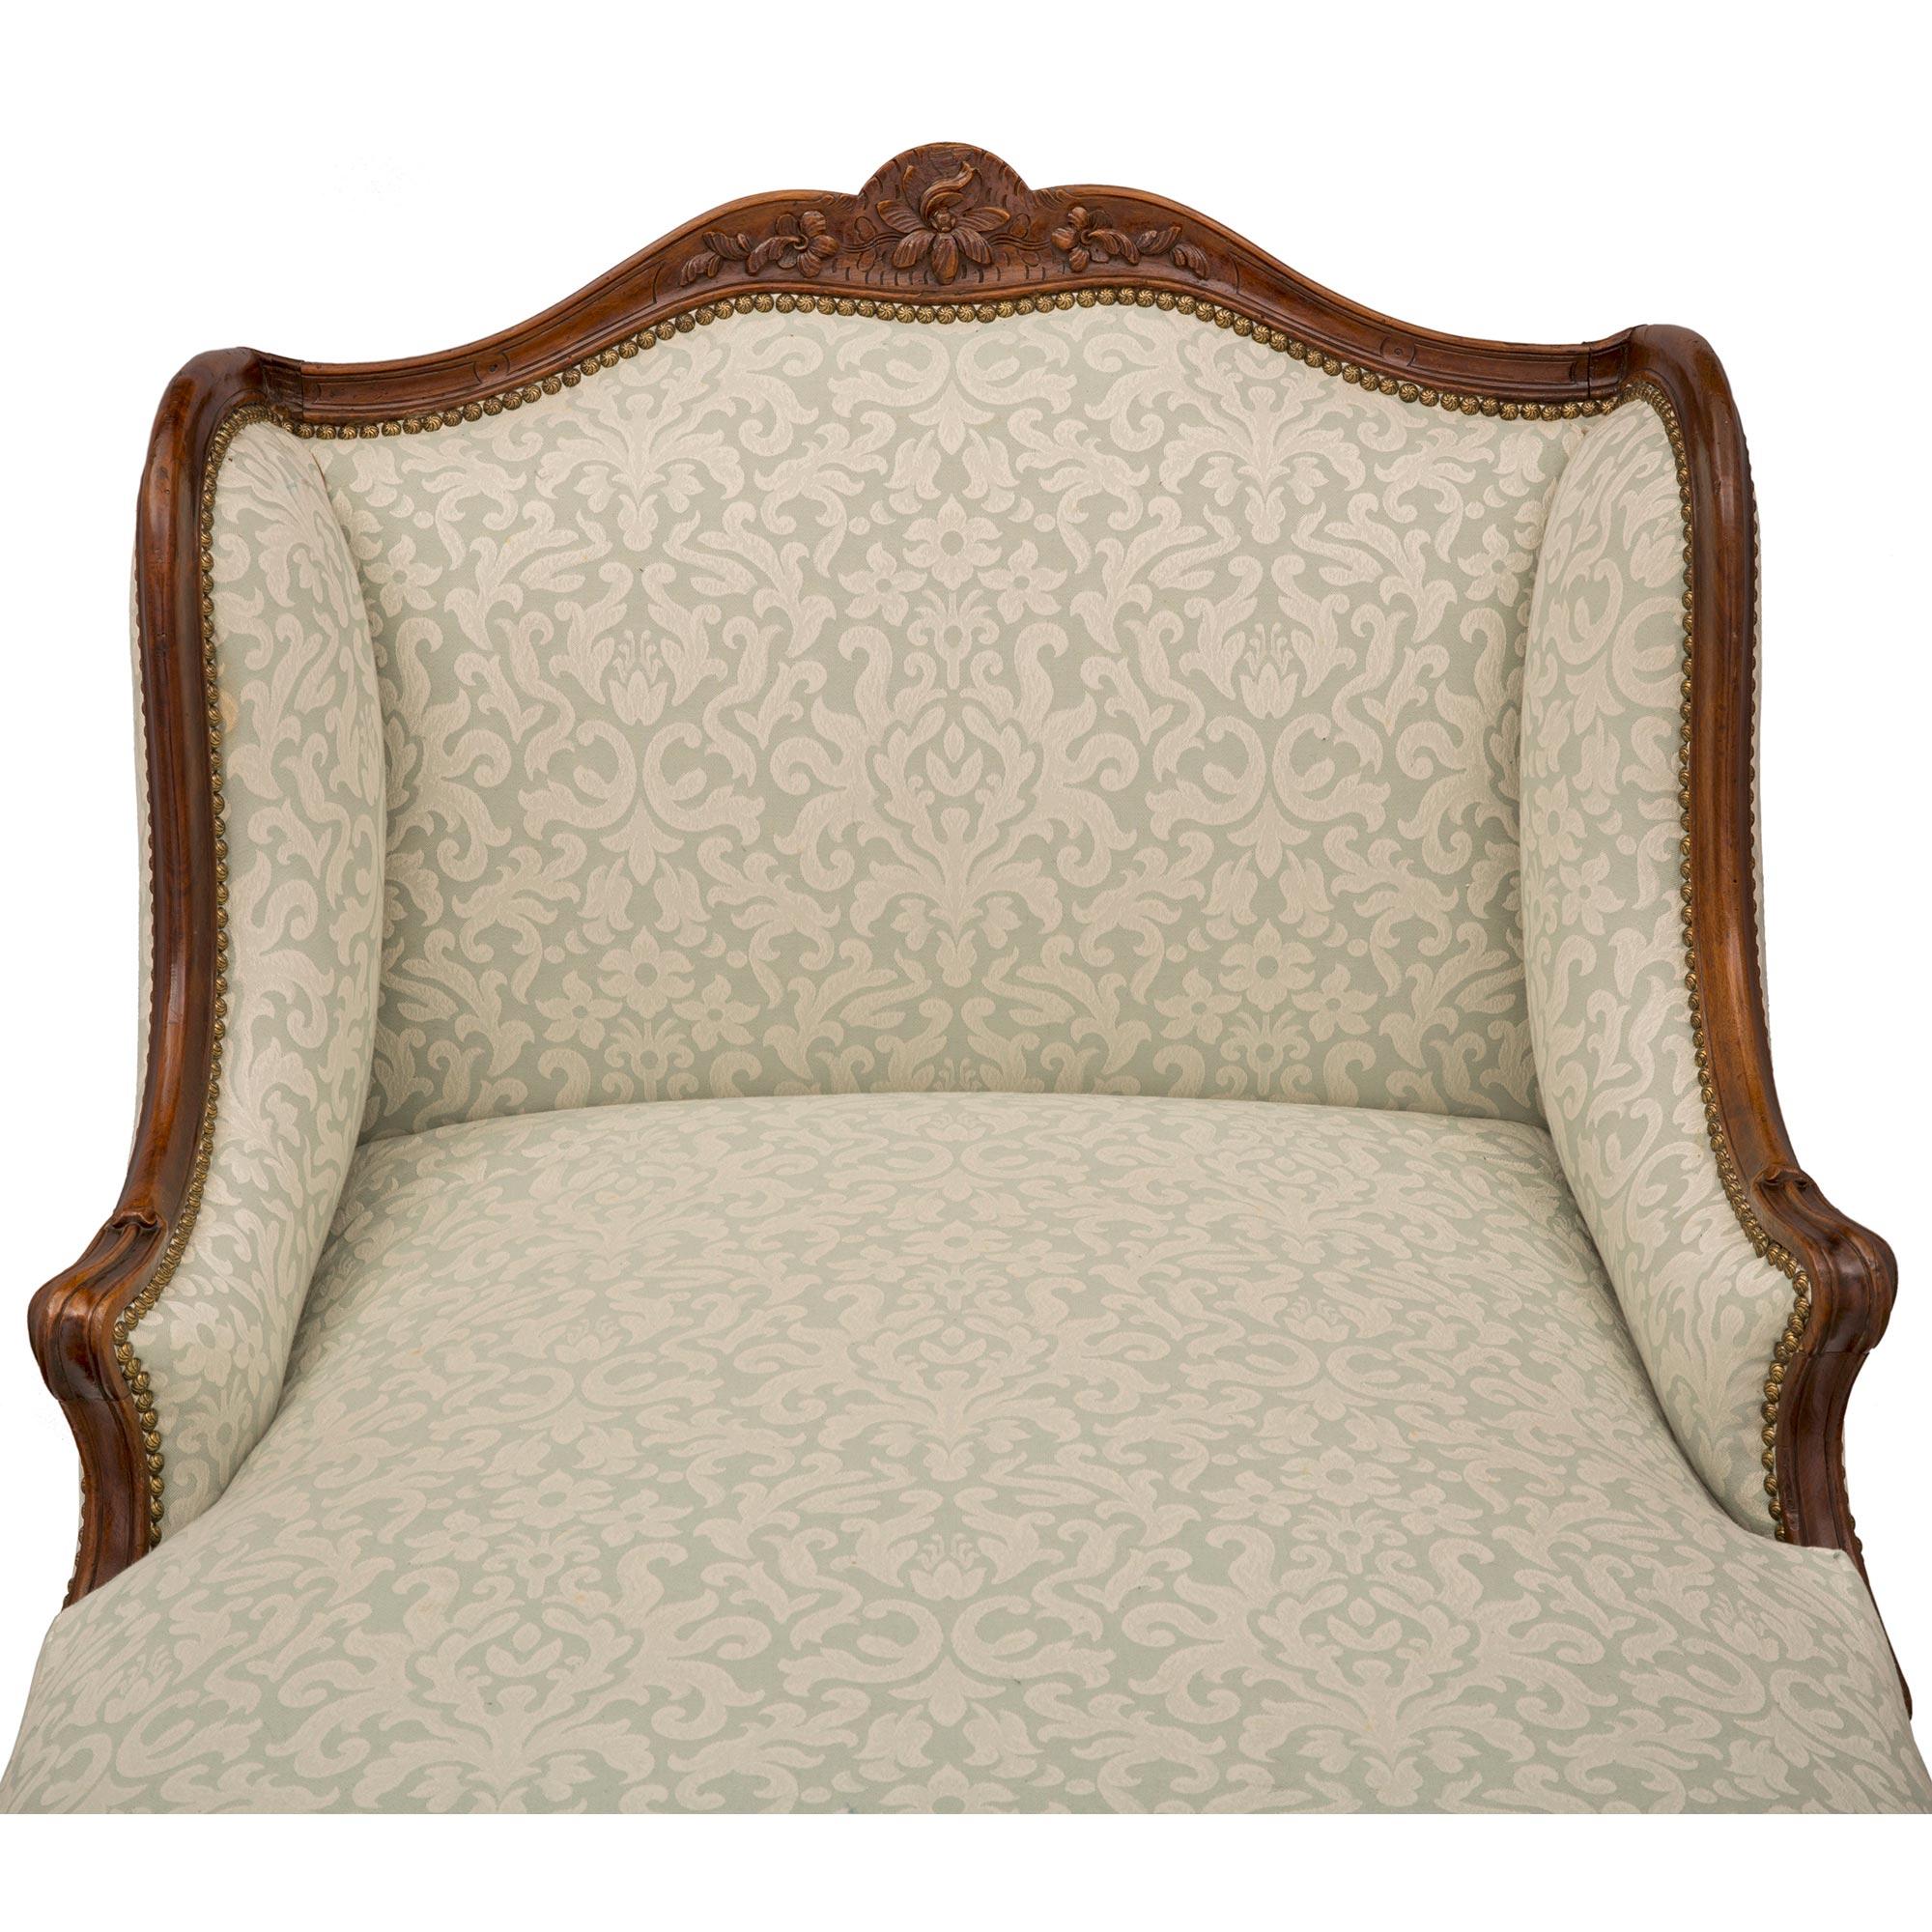 French 18th Century Louis XV Period Walnut Récamier Chaise Lounge In Good Condition For Sale In West Palm Beach, FL